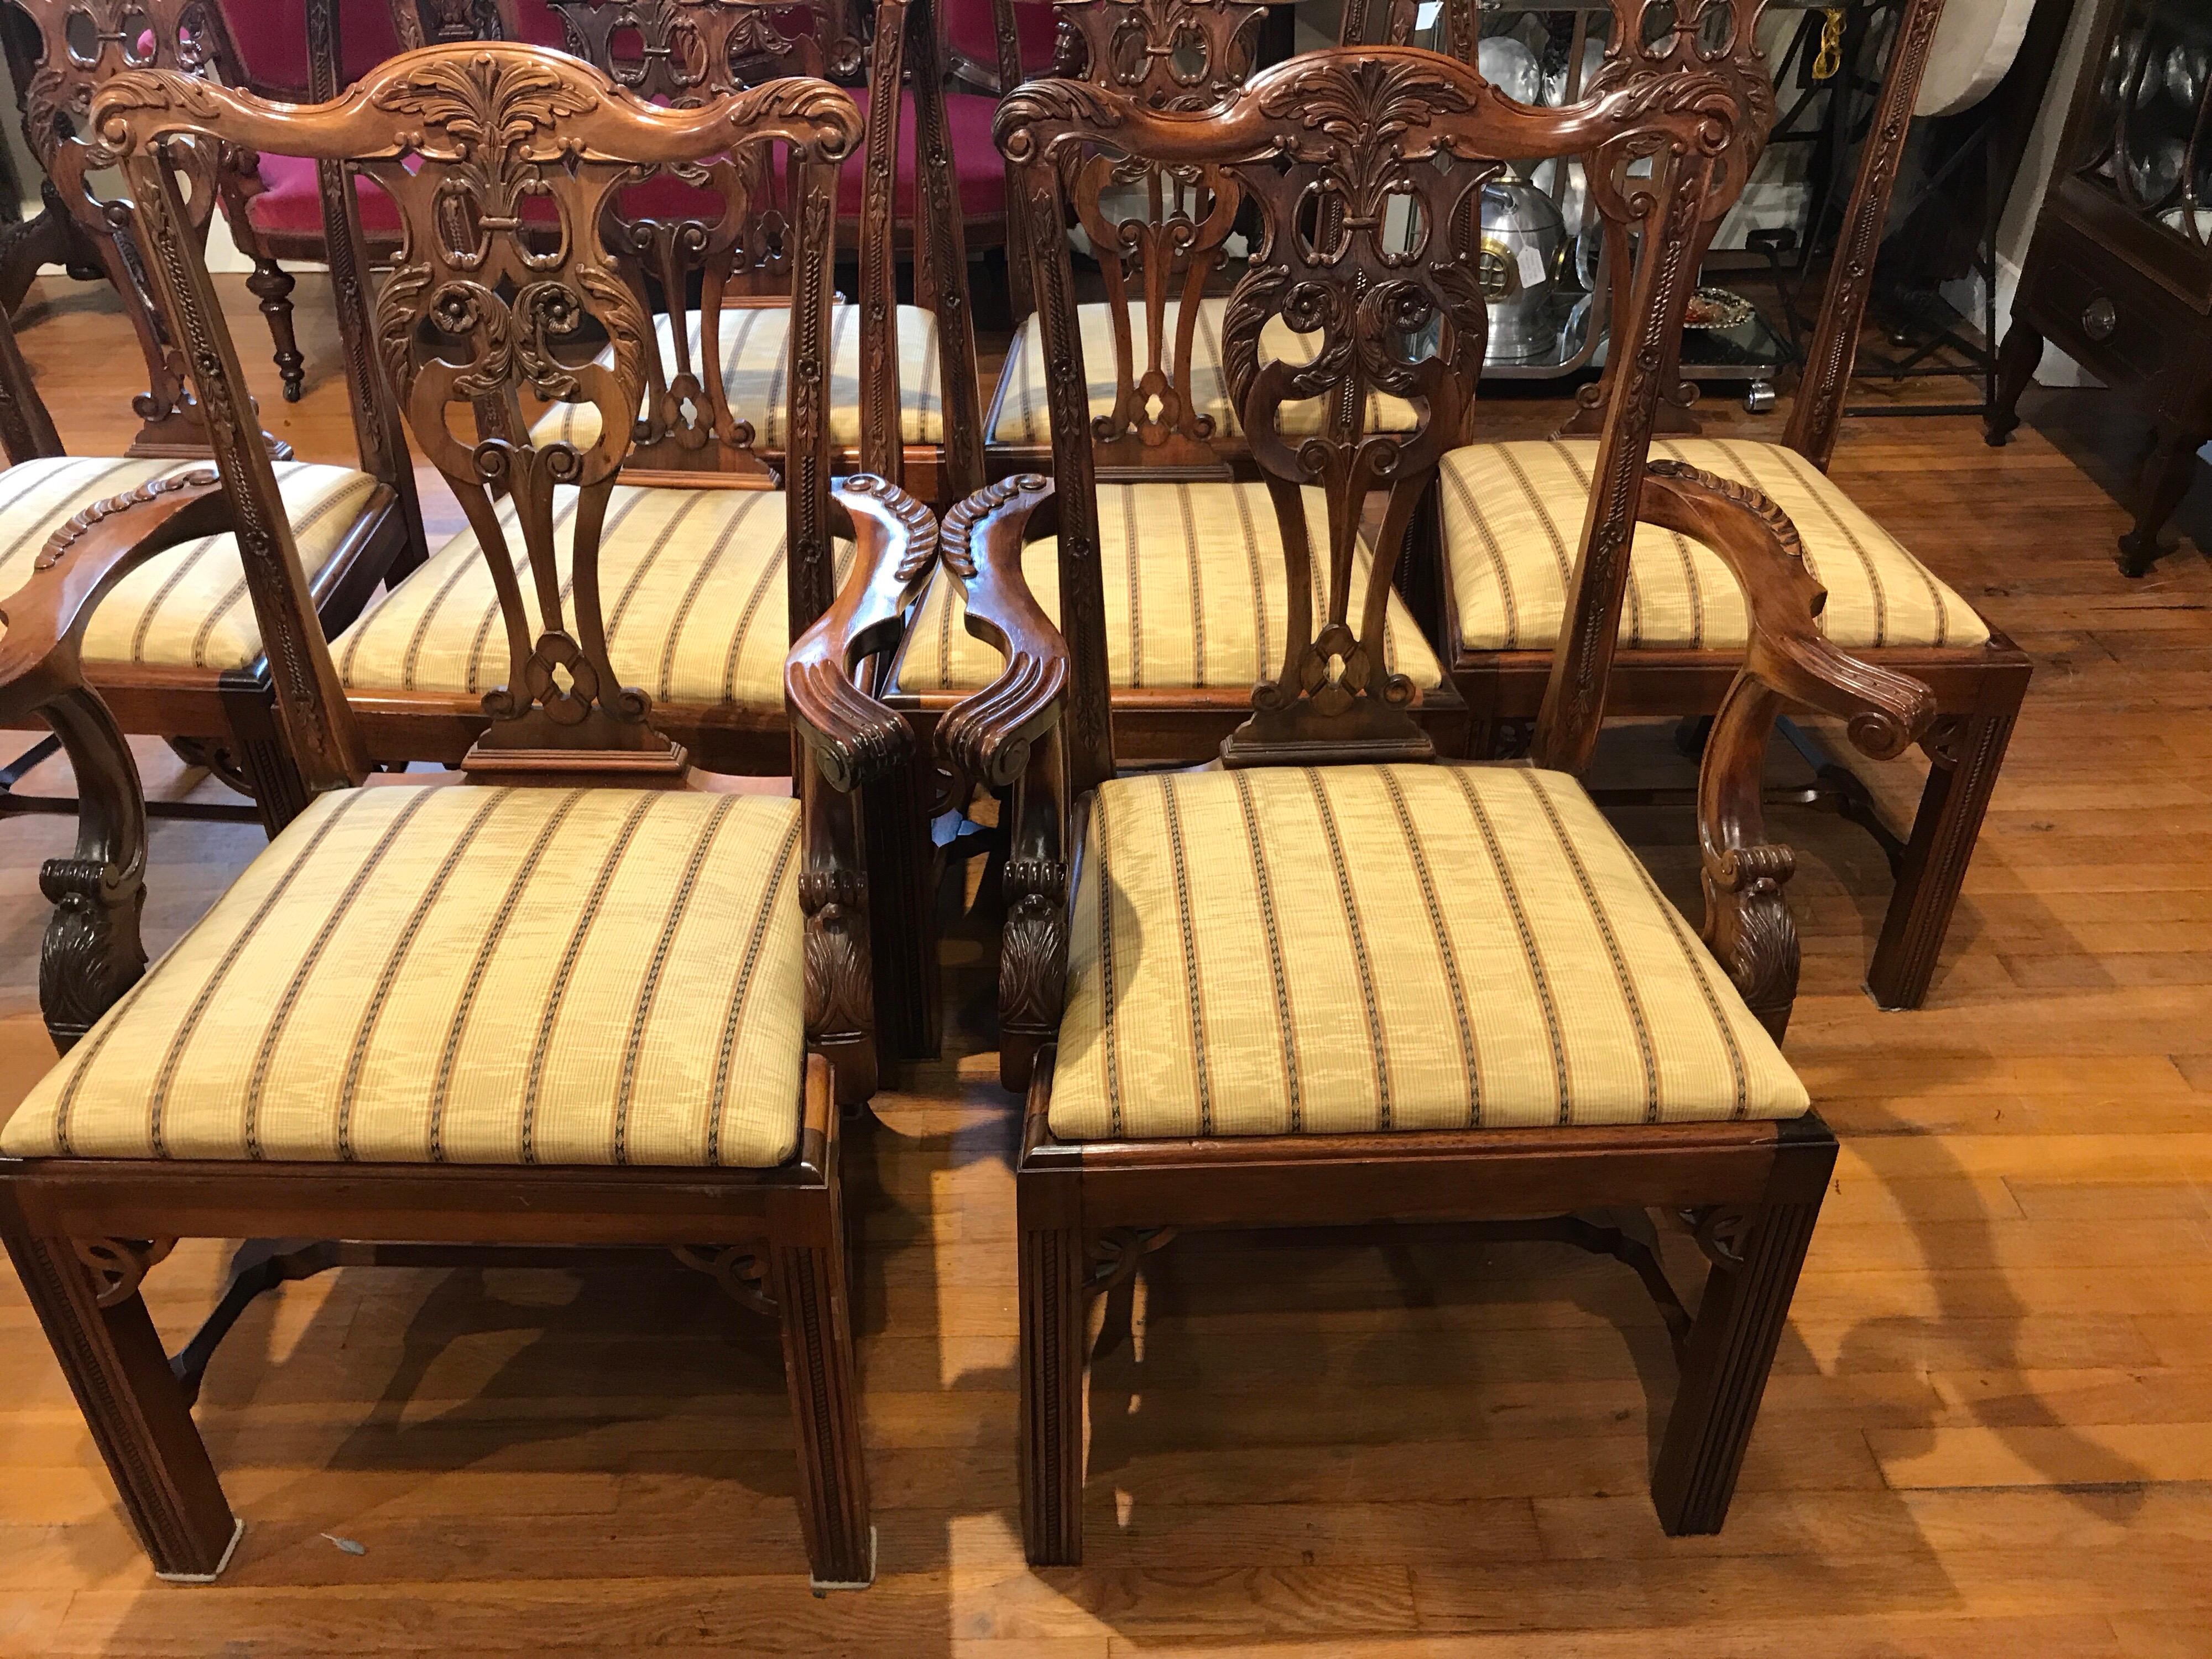 Eight George III style Mahogany dining chairs, with finely carved rosette backrests, raised on reeded Marlborough legs.
The arm chairs measures: 40